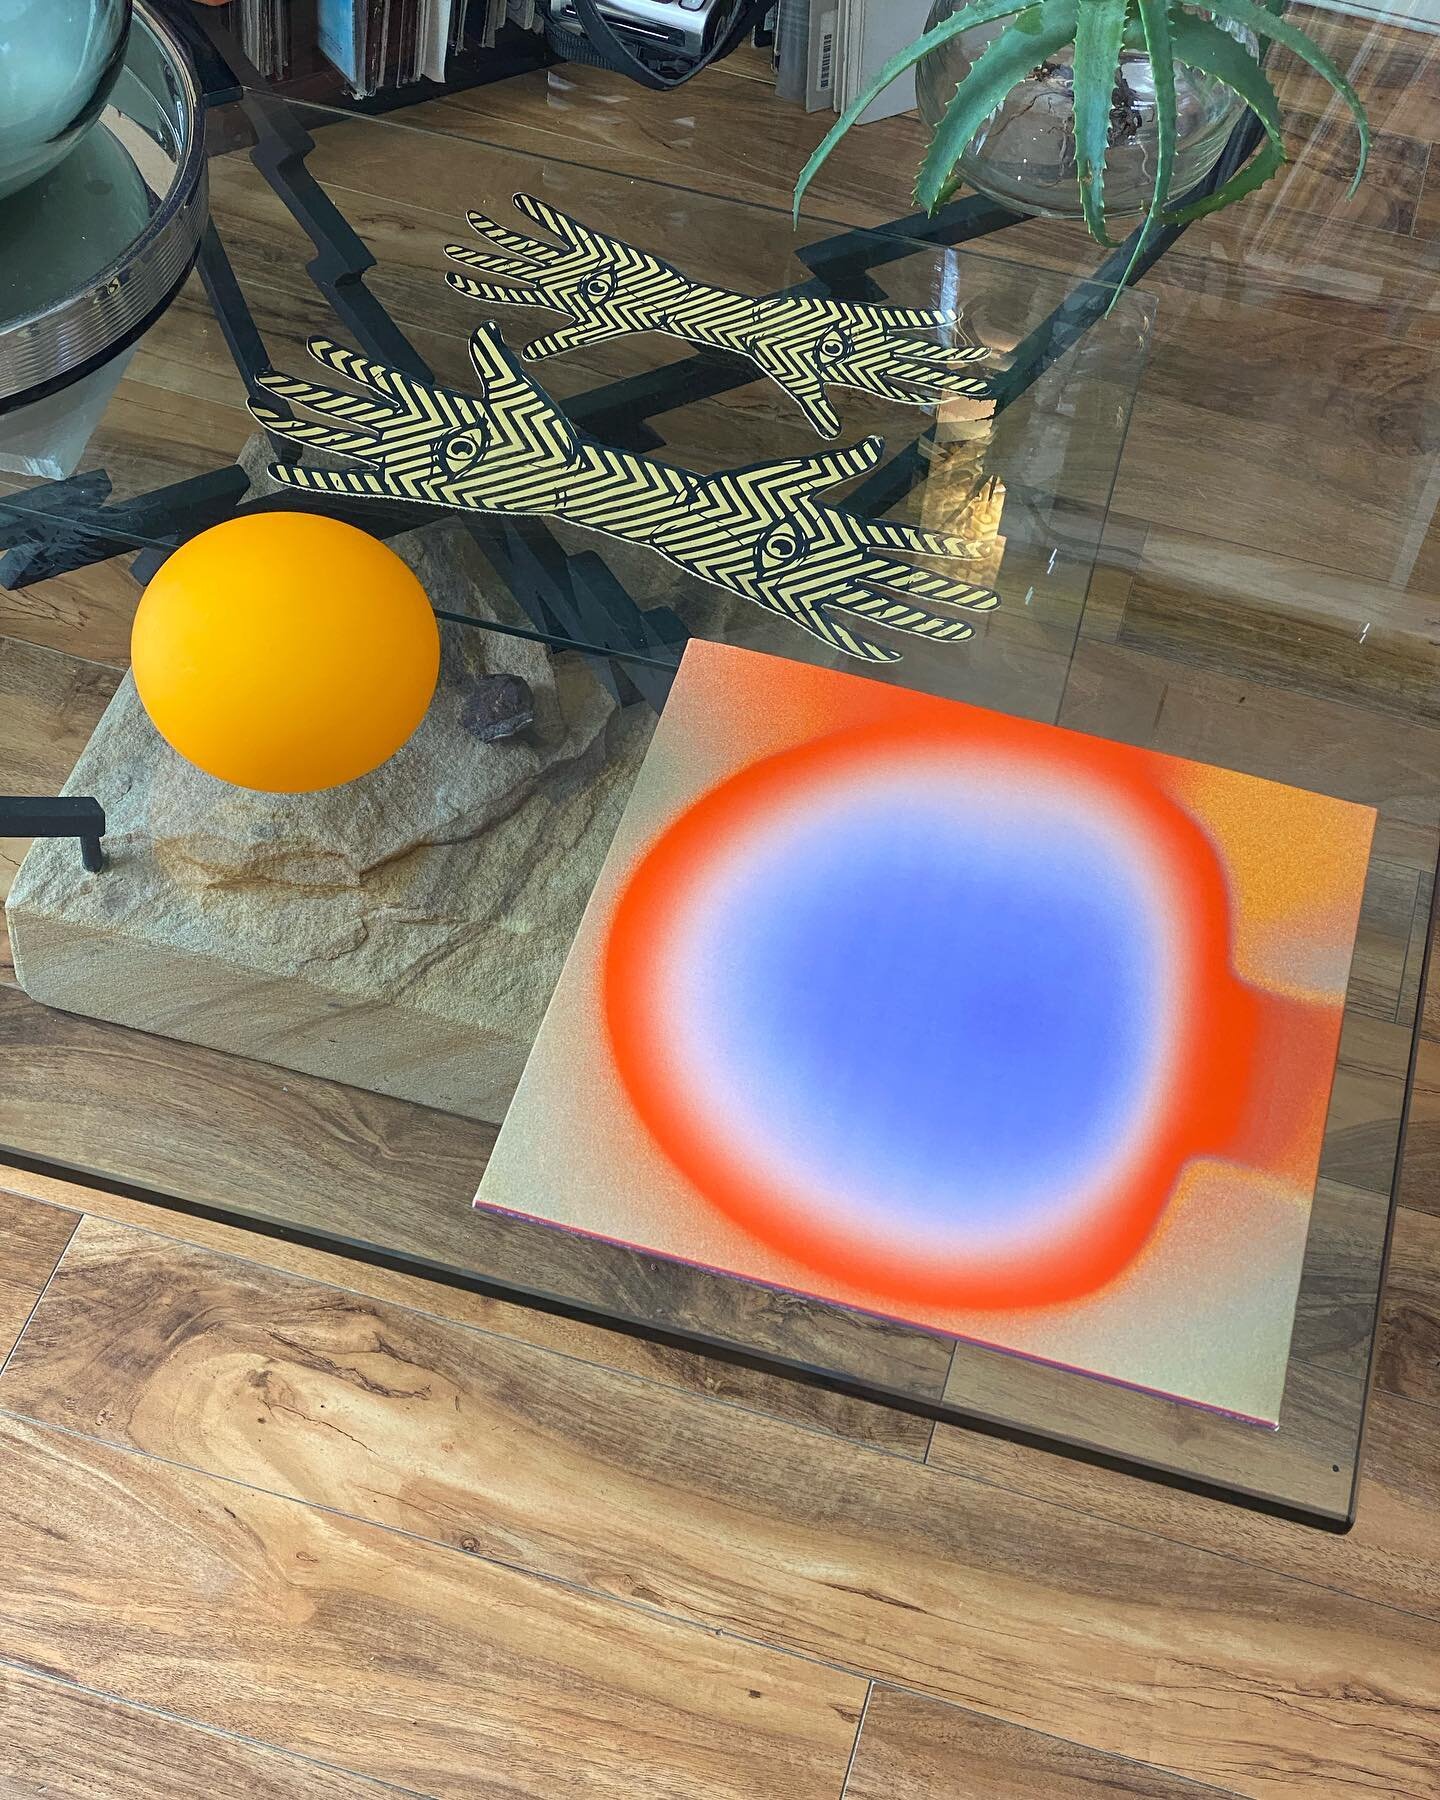 Unctuous palate, such superb  album art  Barbara  Acevedo and music from Max Lange&hellip;. The perfect sparse sparkly lounge sound, Deserved a still life moment with MCM art glass (egg yolk yellow) from Bondi market and new Accessory Emergency handy